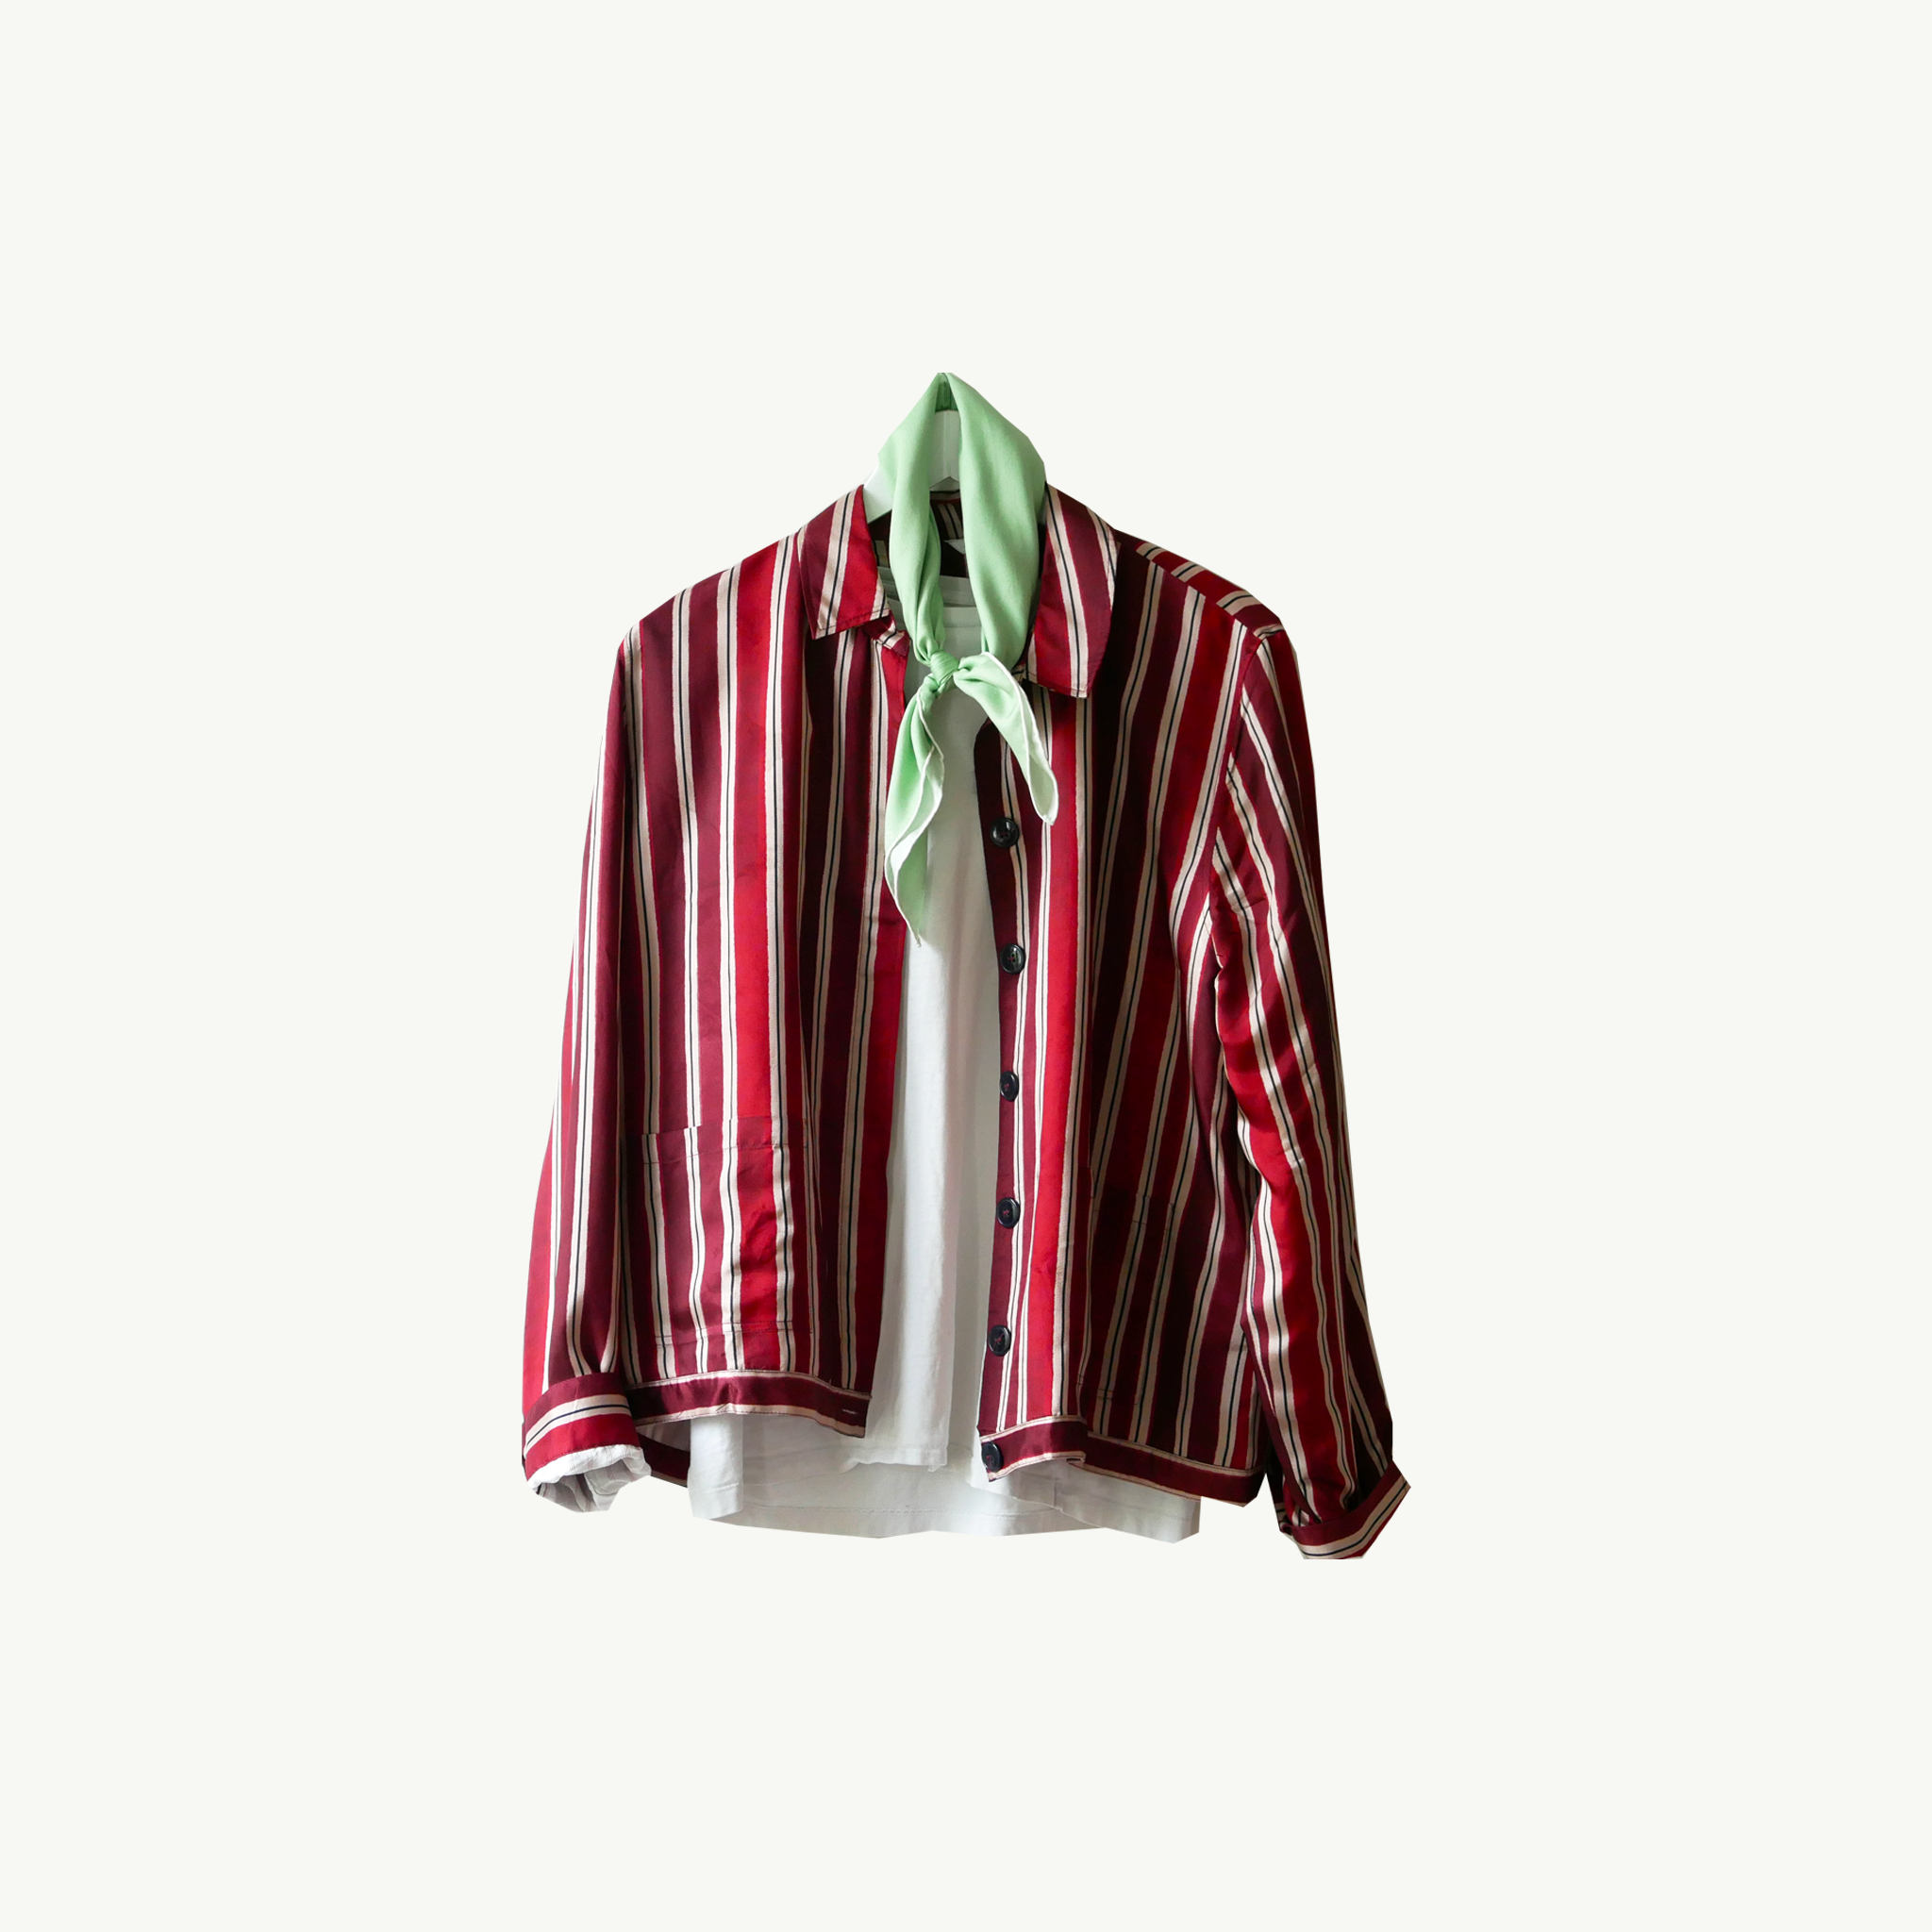 Capri, 20h08 handcrafted scarf worn on a red printed silk jacket over a white tee in A Day In The Life...Part III by Les Belles Heures